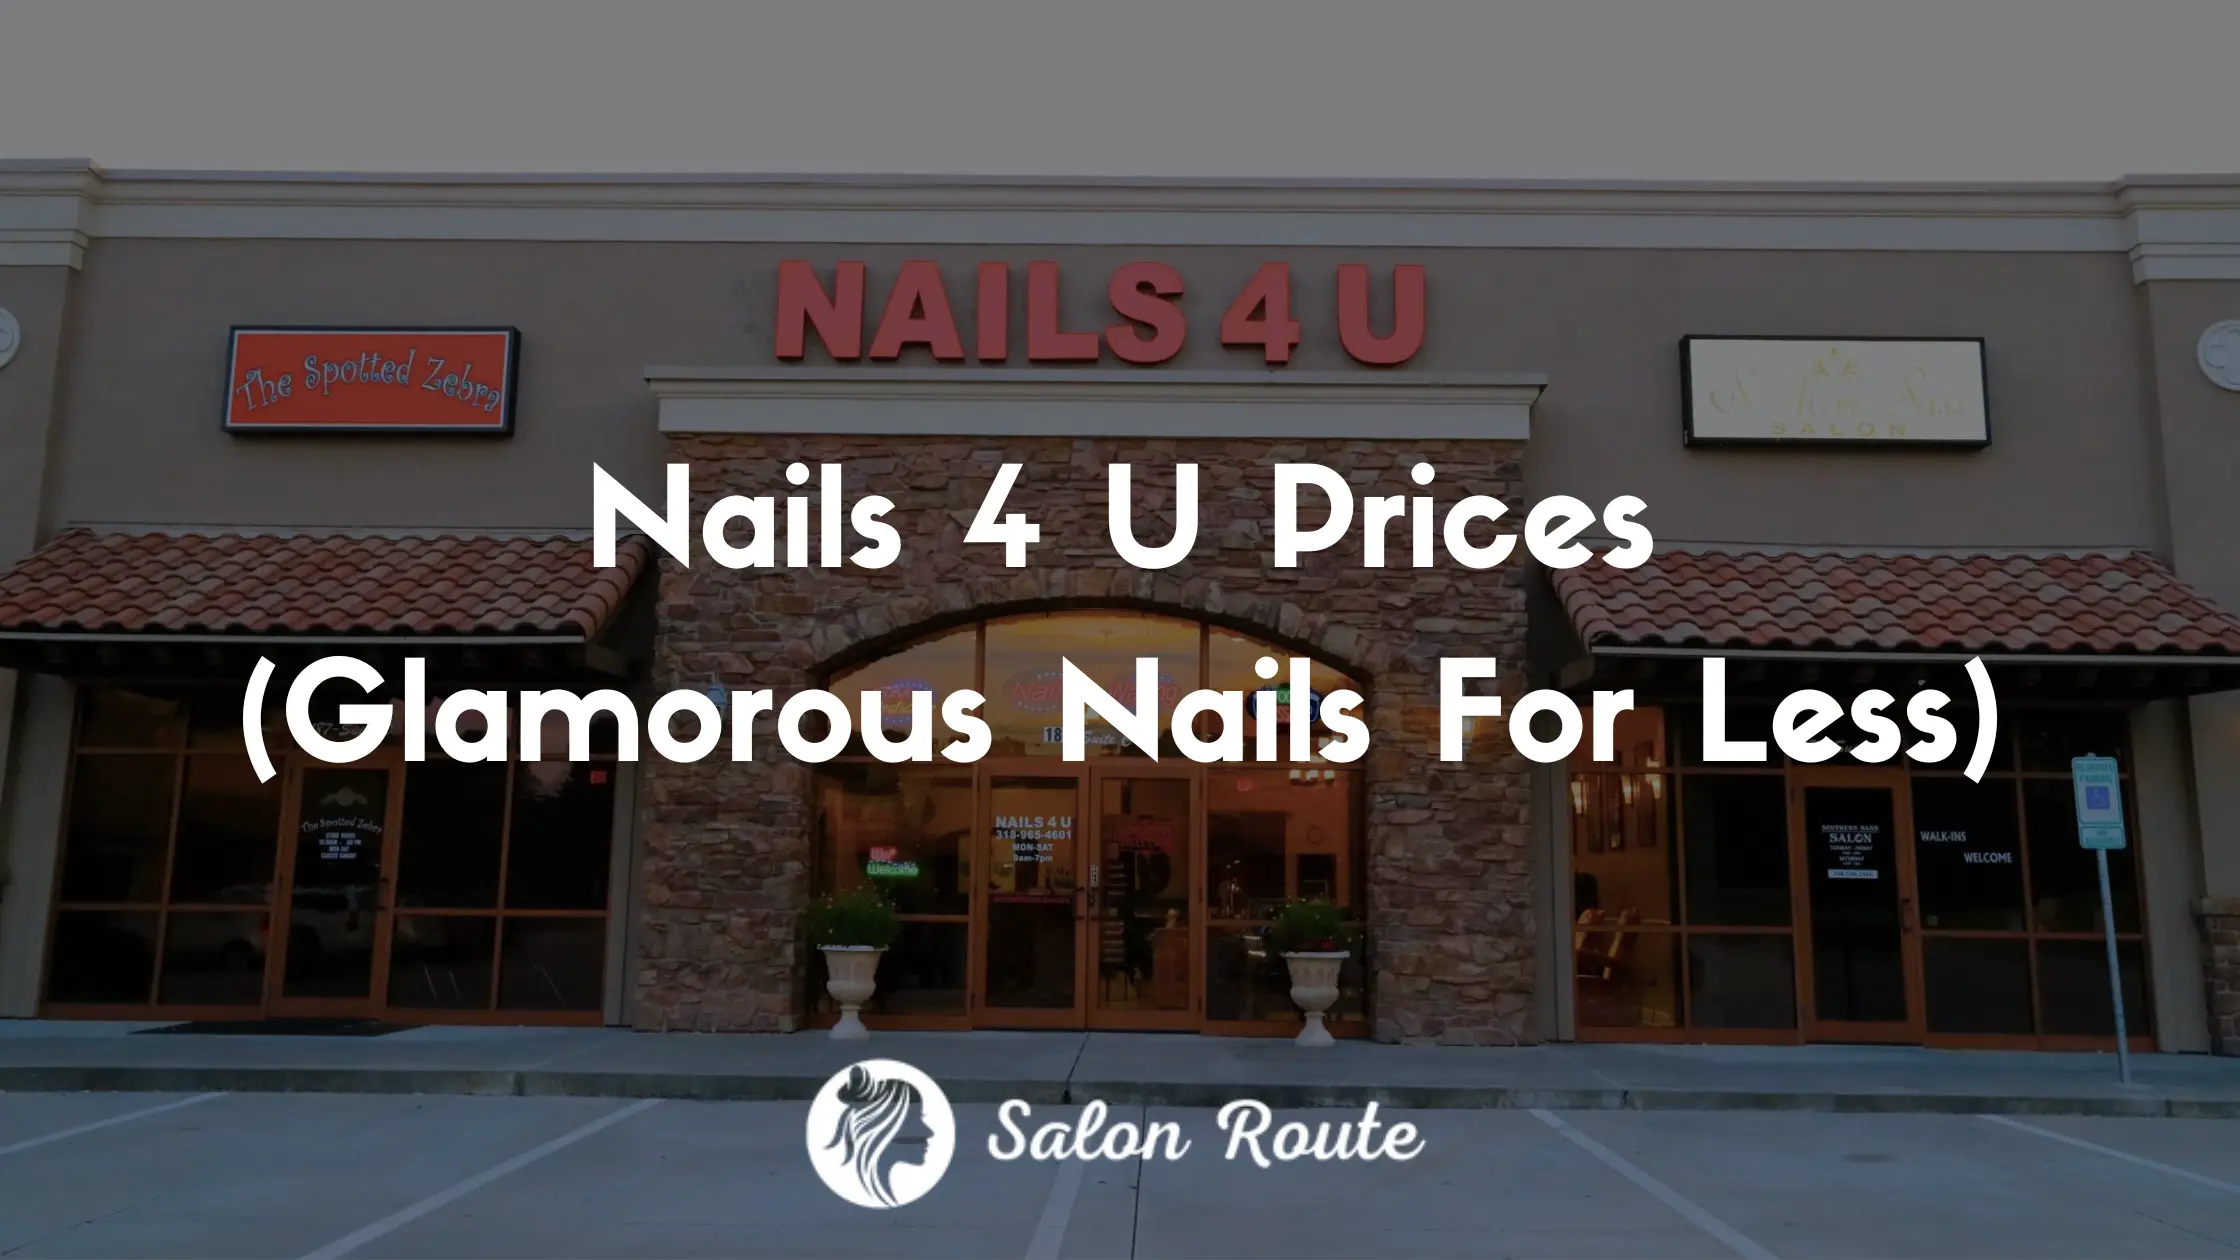 Nails 4 U Prices (Glamorous Nails For Less)